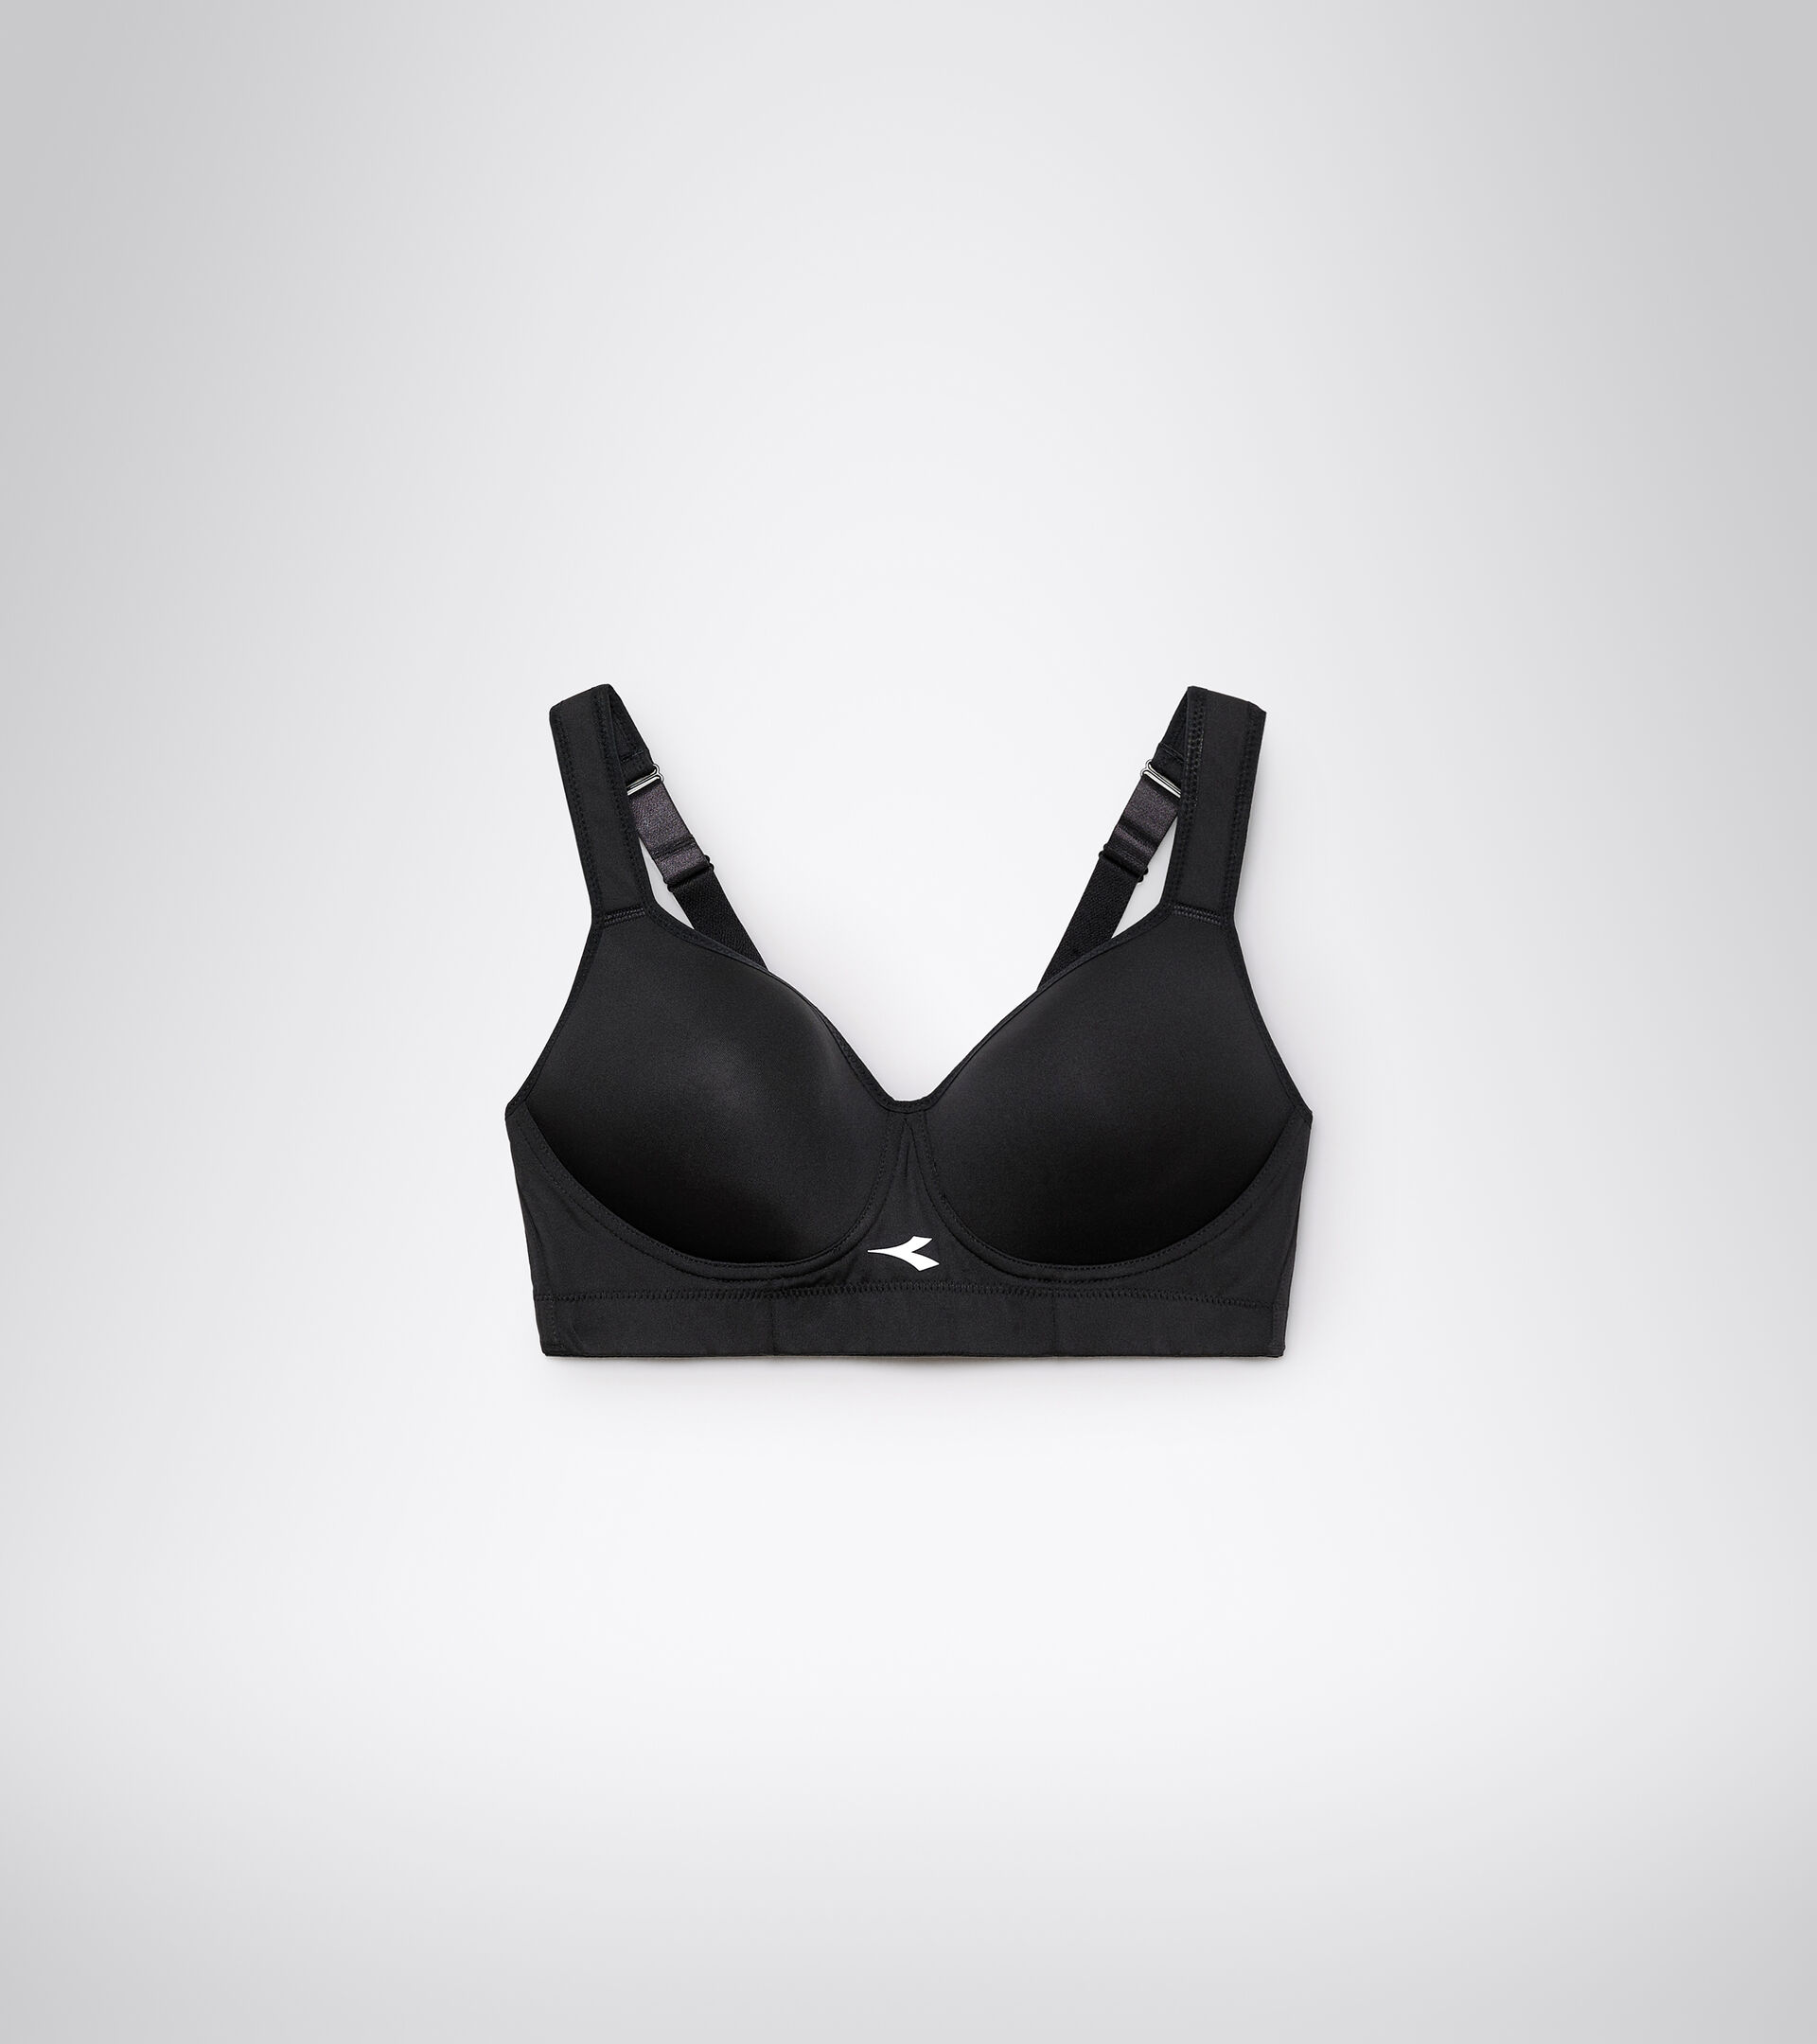 High Impact Sports Bras for Women Underwire Push-Up Yoga Bra Lace D 34/75B  